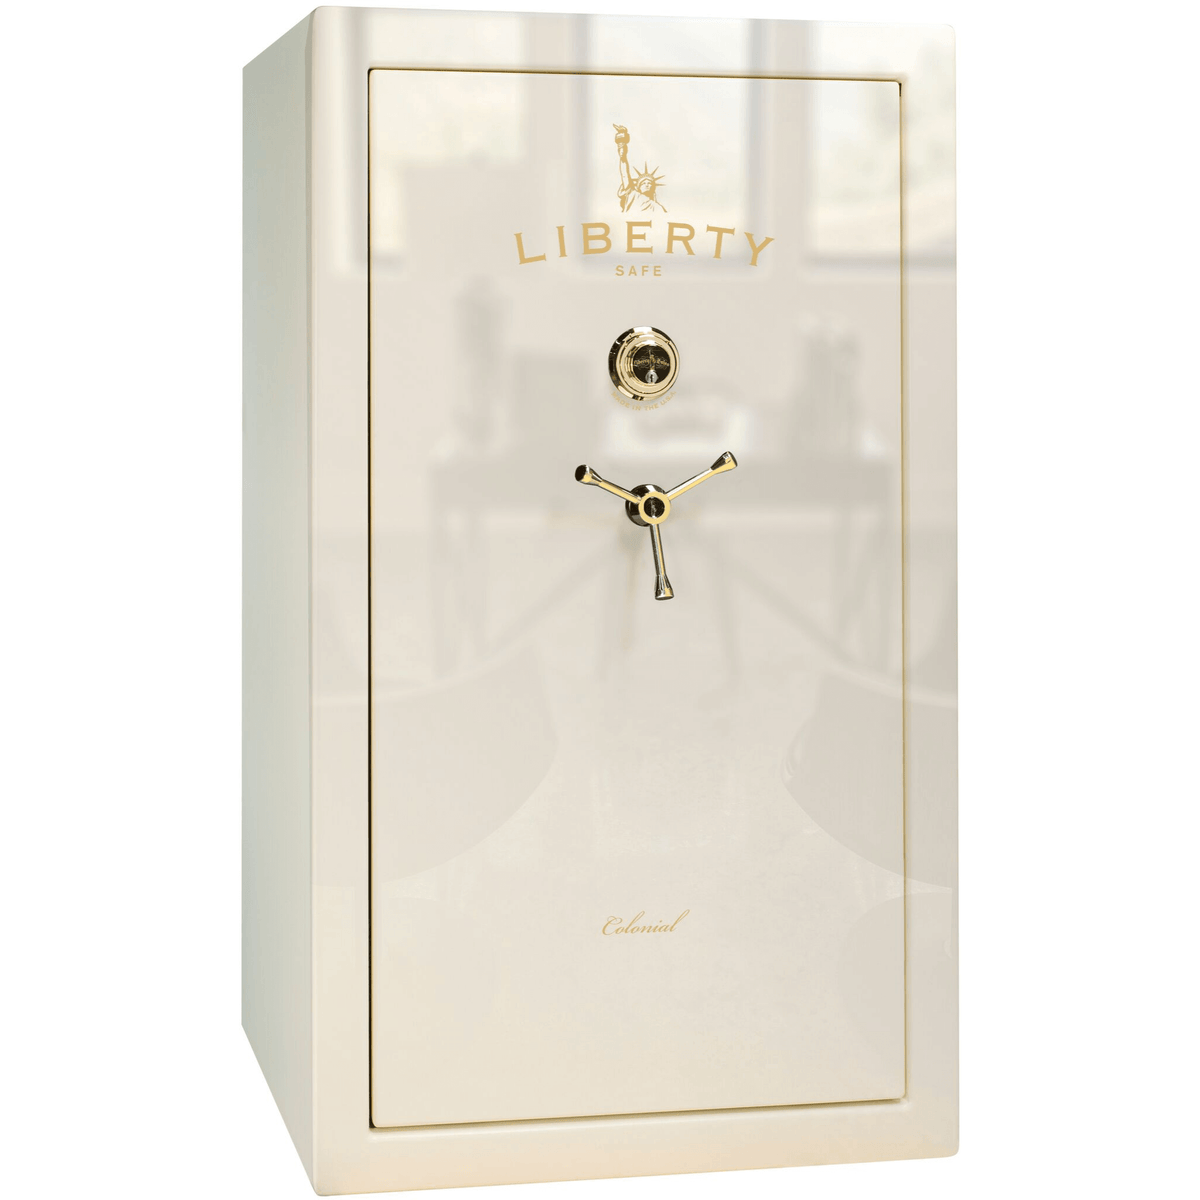 Liberty Colonial 30 Safe in White Gloss with Brass Mechanical Lock.